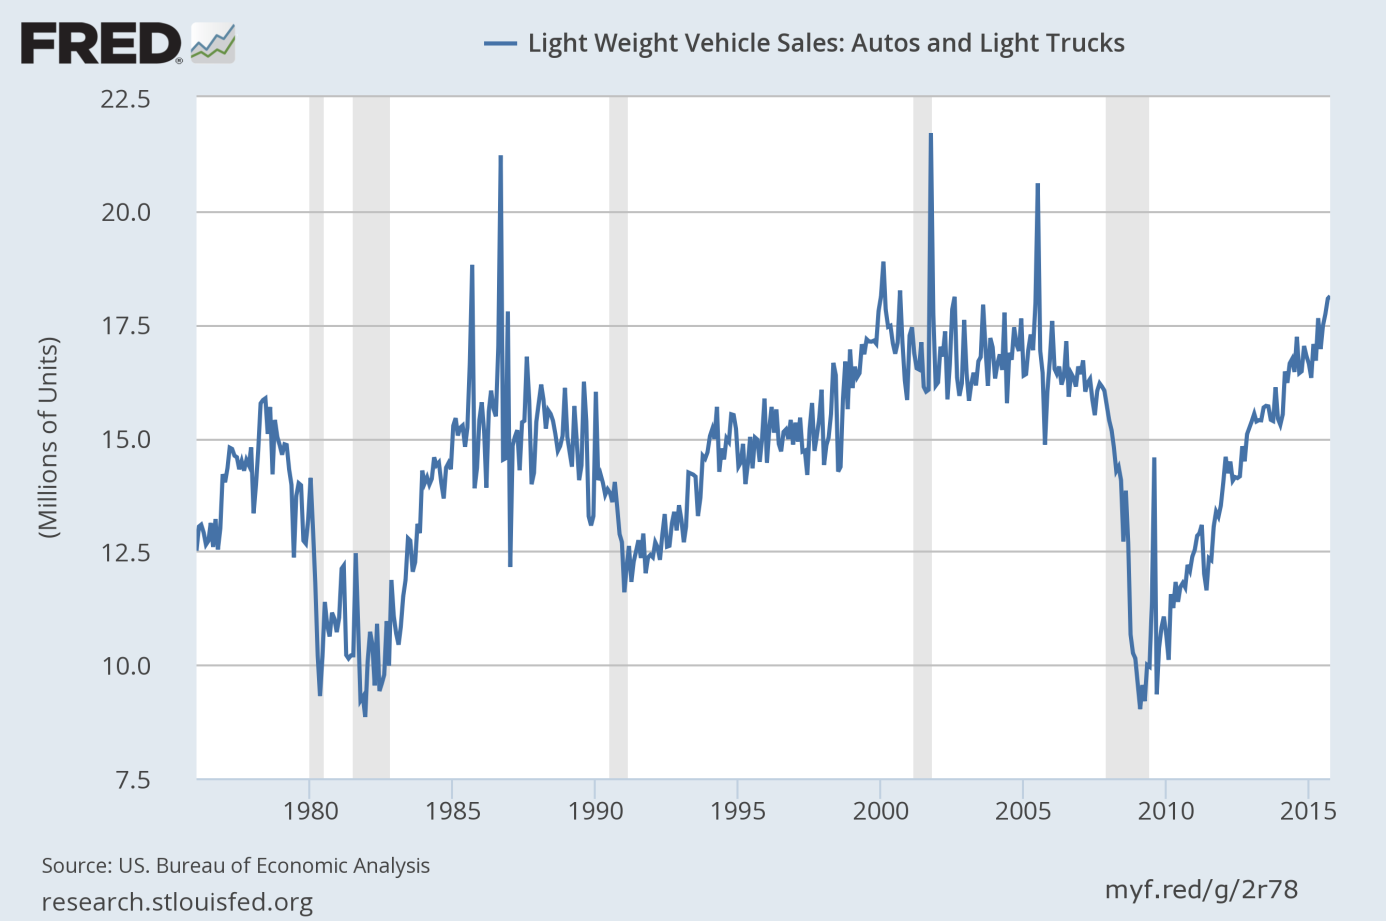 Annual auto and light truck sales (in millions of units) from 1976 to 2015